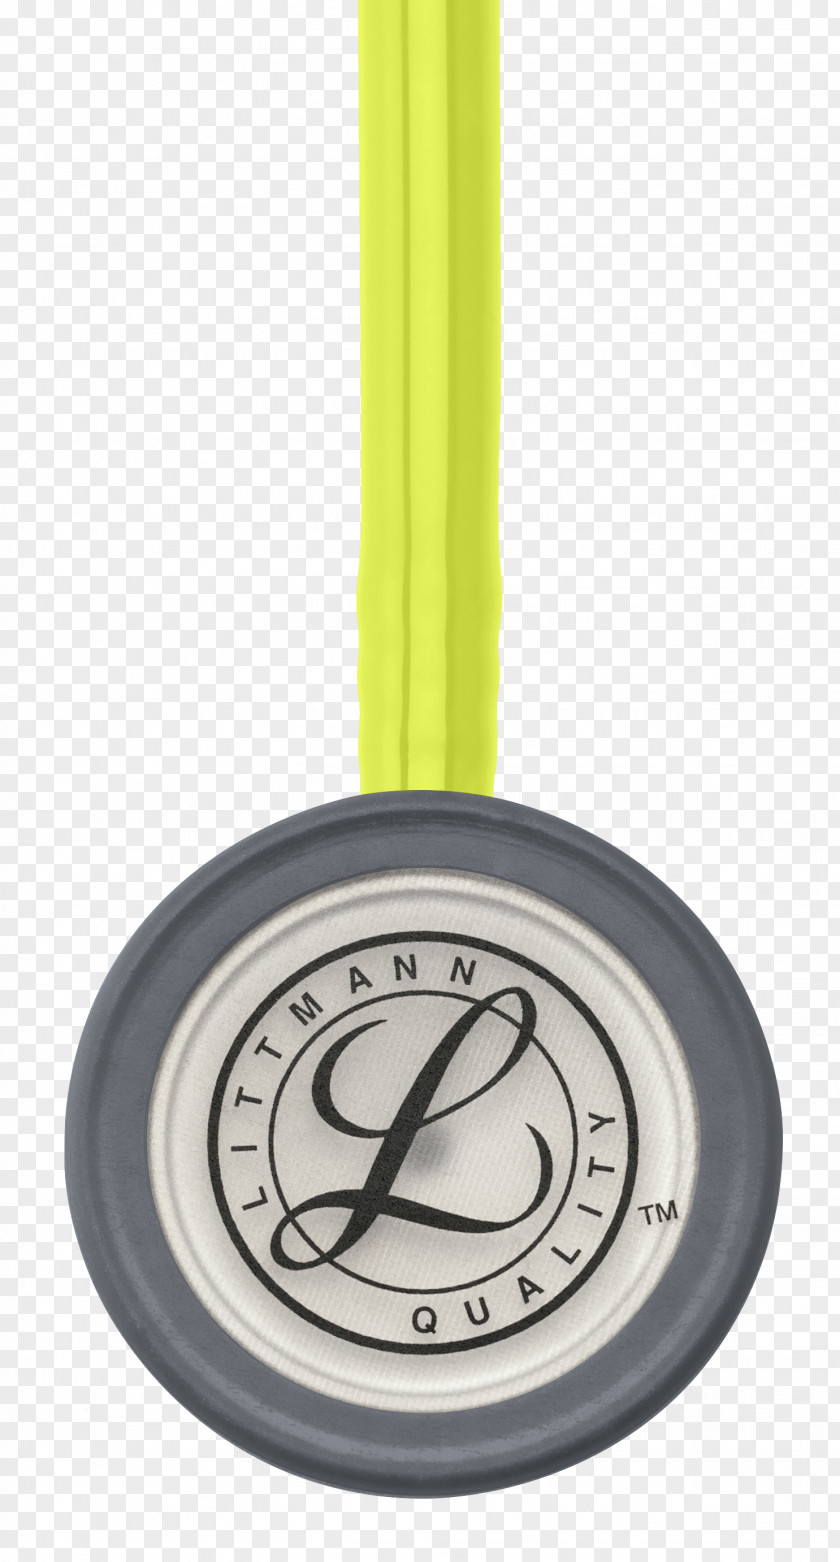 Lemon And Lime Stethoscope Medicine Auscultation Medical Equipment Welch Allyn PNG